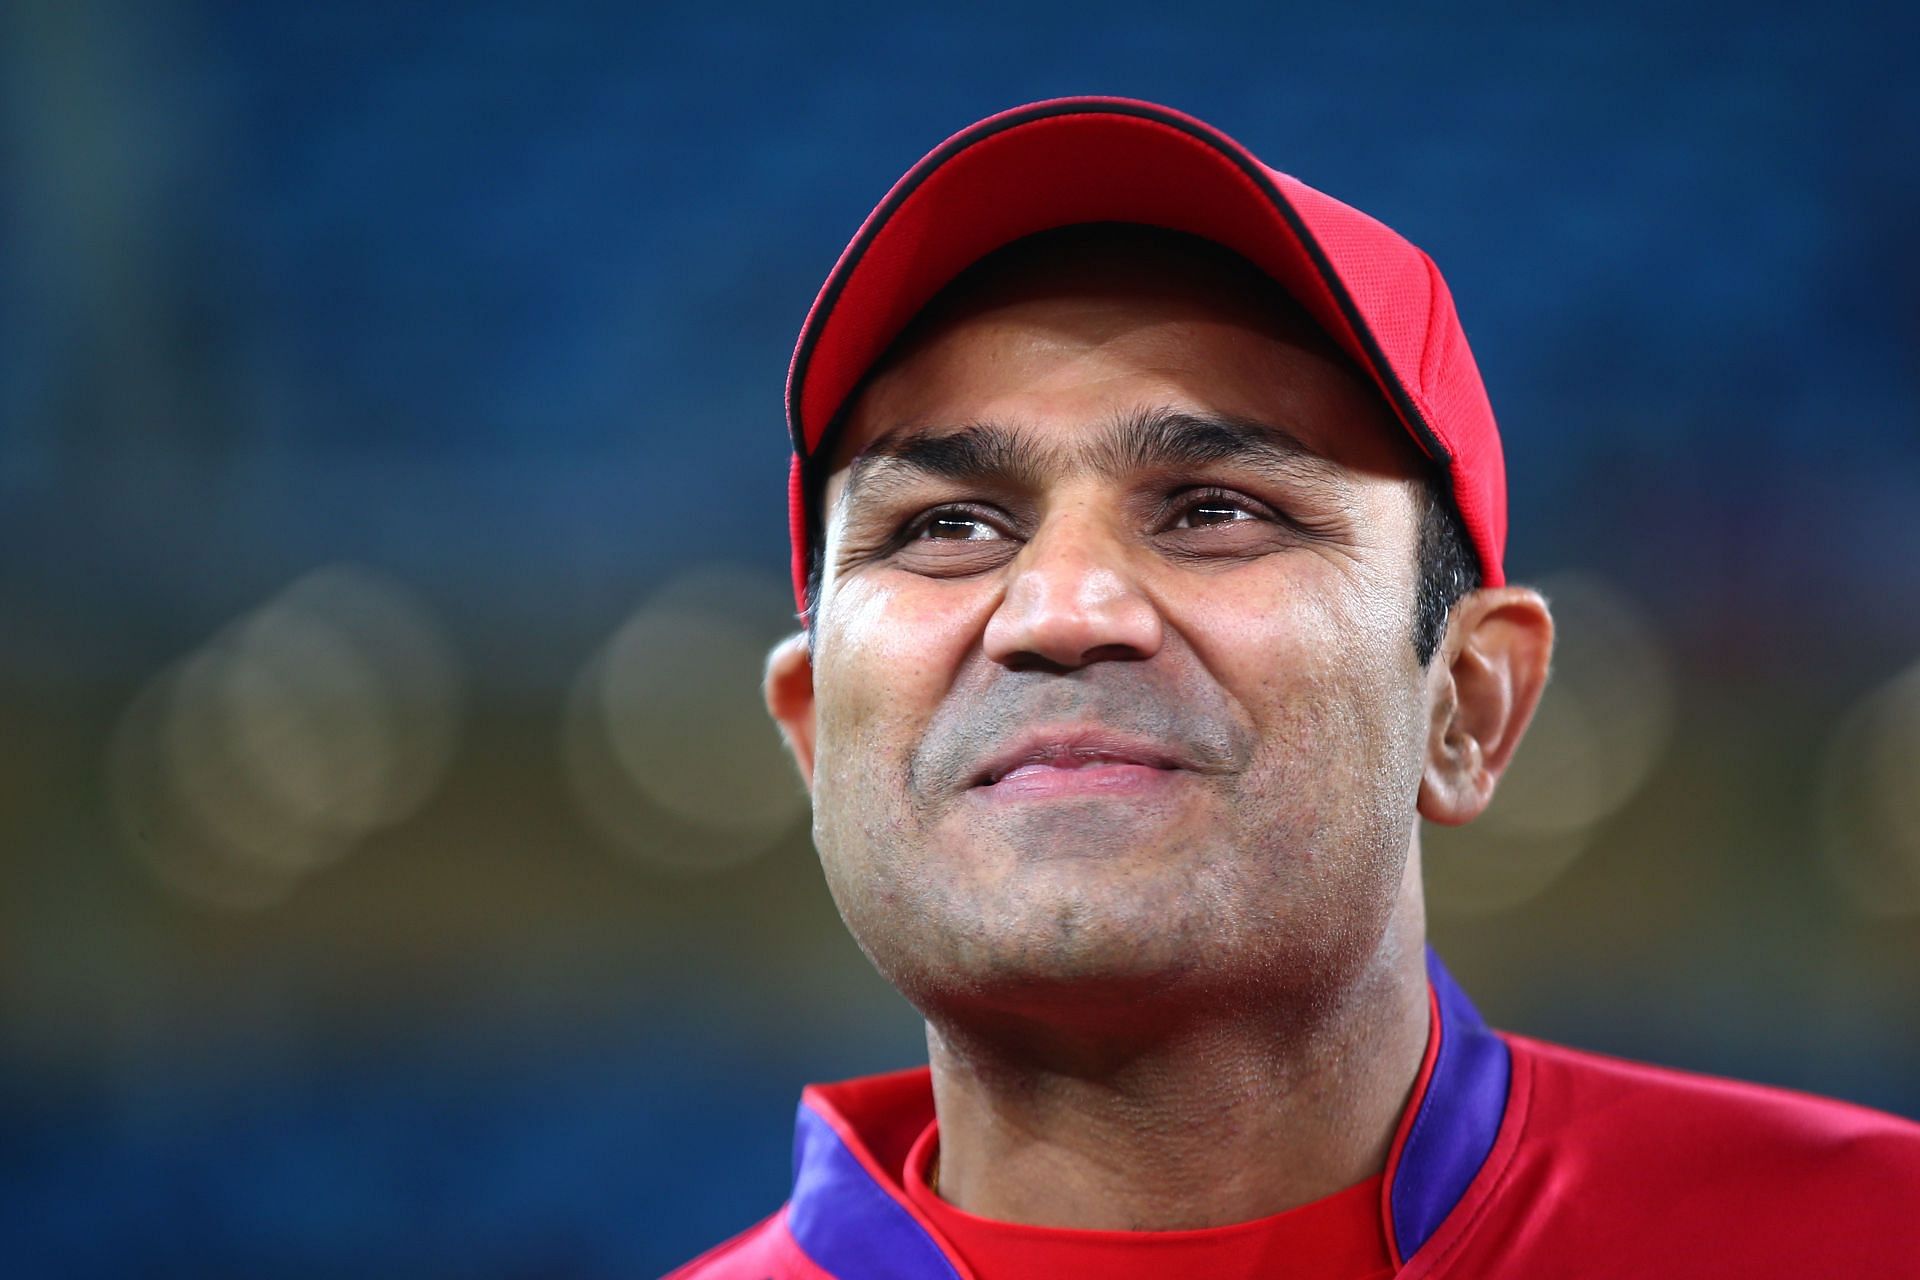 Virender Sehwag will be seen opening the innings for the India Maharajas.